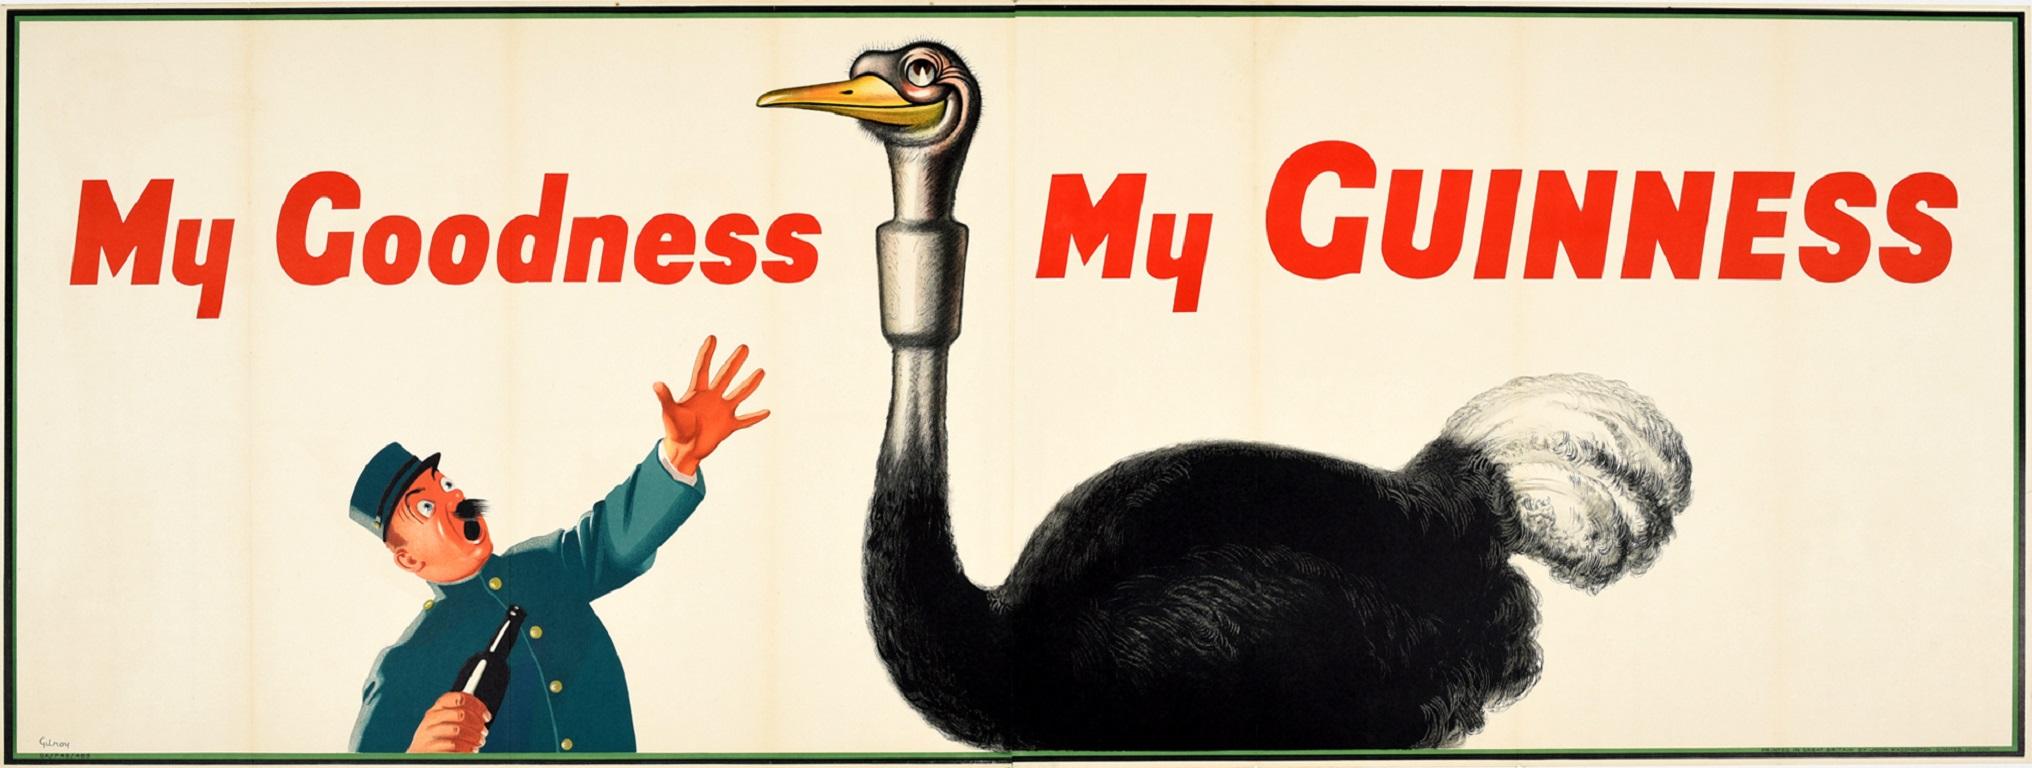 John Gilroy Print - Original Vintage My Goodness My Guinness Poster Stout Beer Ad Ostrich Zoo Keeper